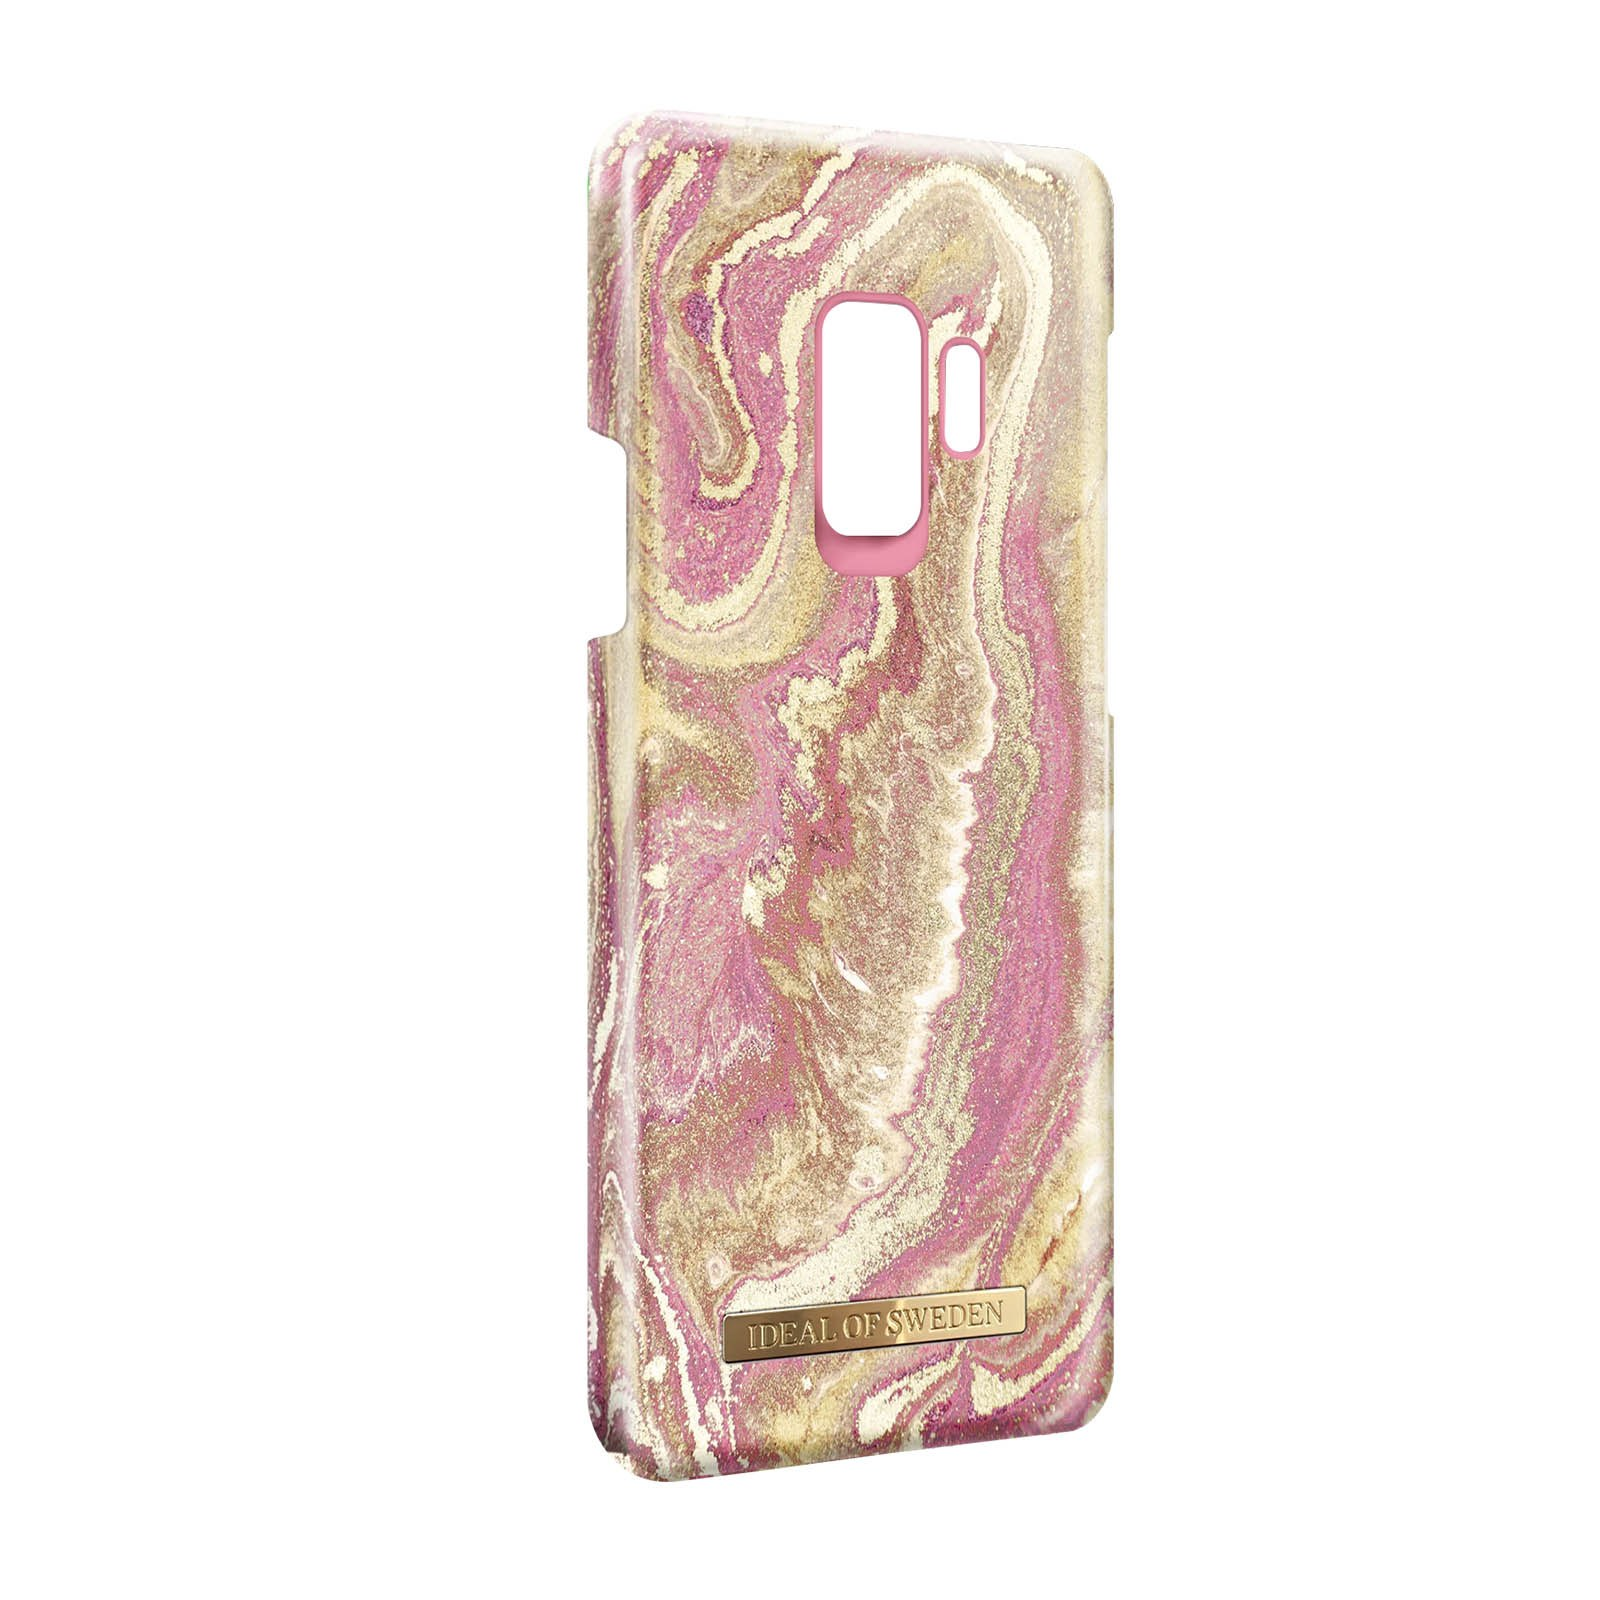 IDEAL OF SWEDEN Golden Blush Galaxy Series, Hülle Samsung, S9, Rosa Backcover, Marble